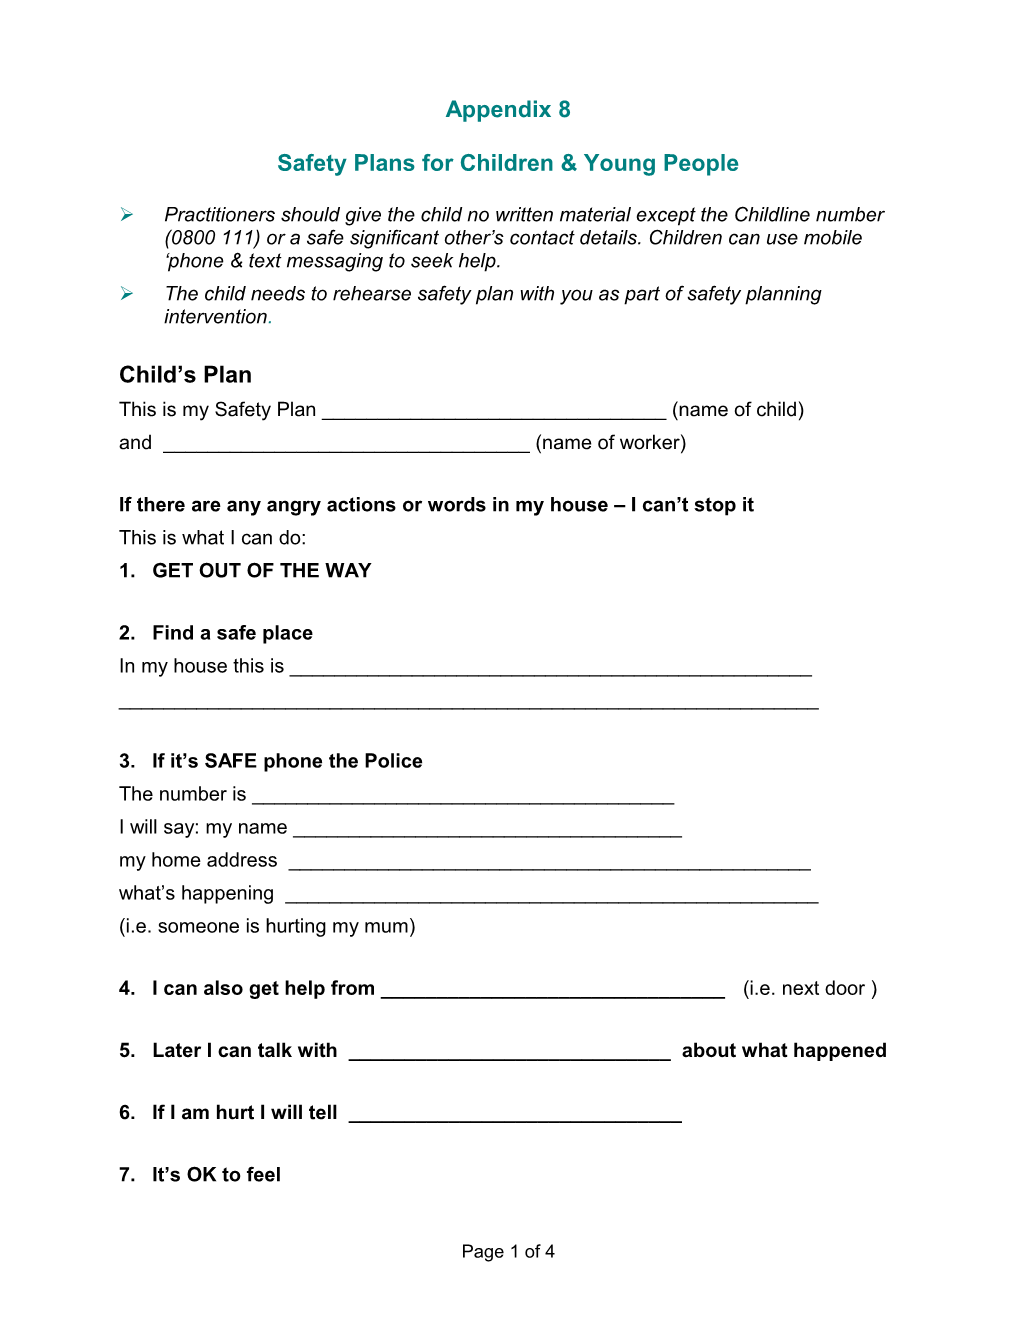 Safety Plans for Children & Young People